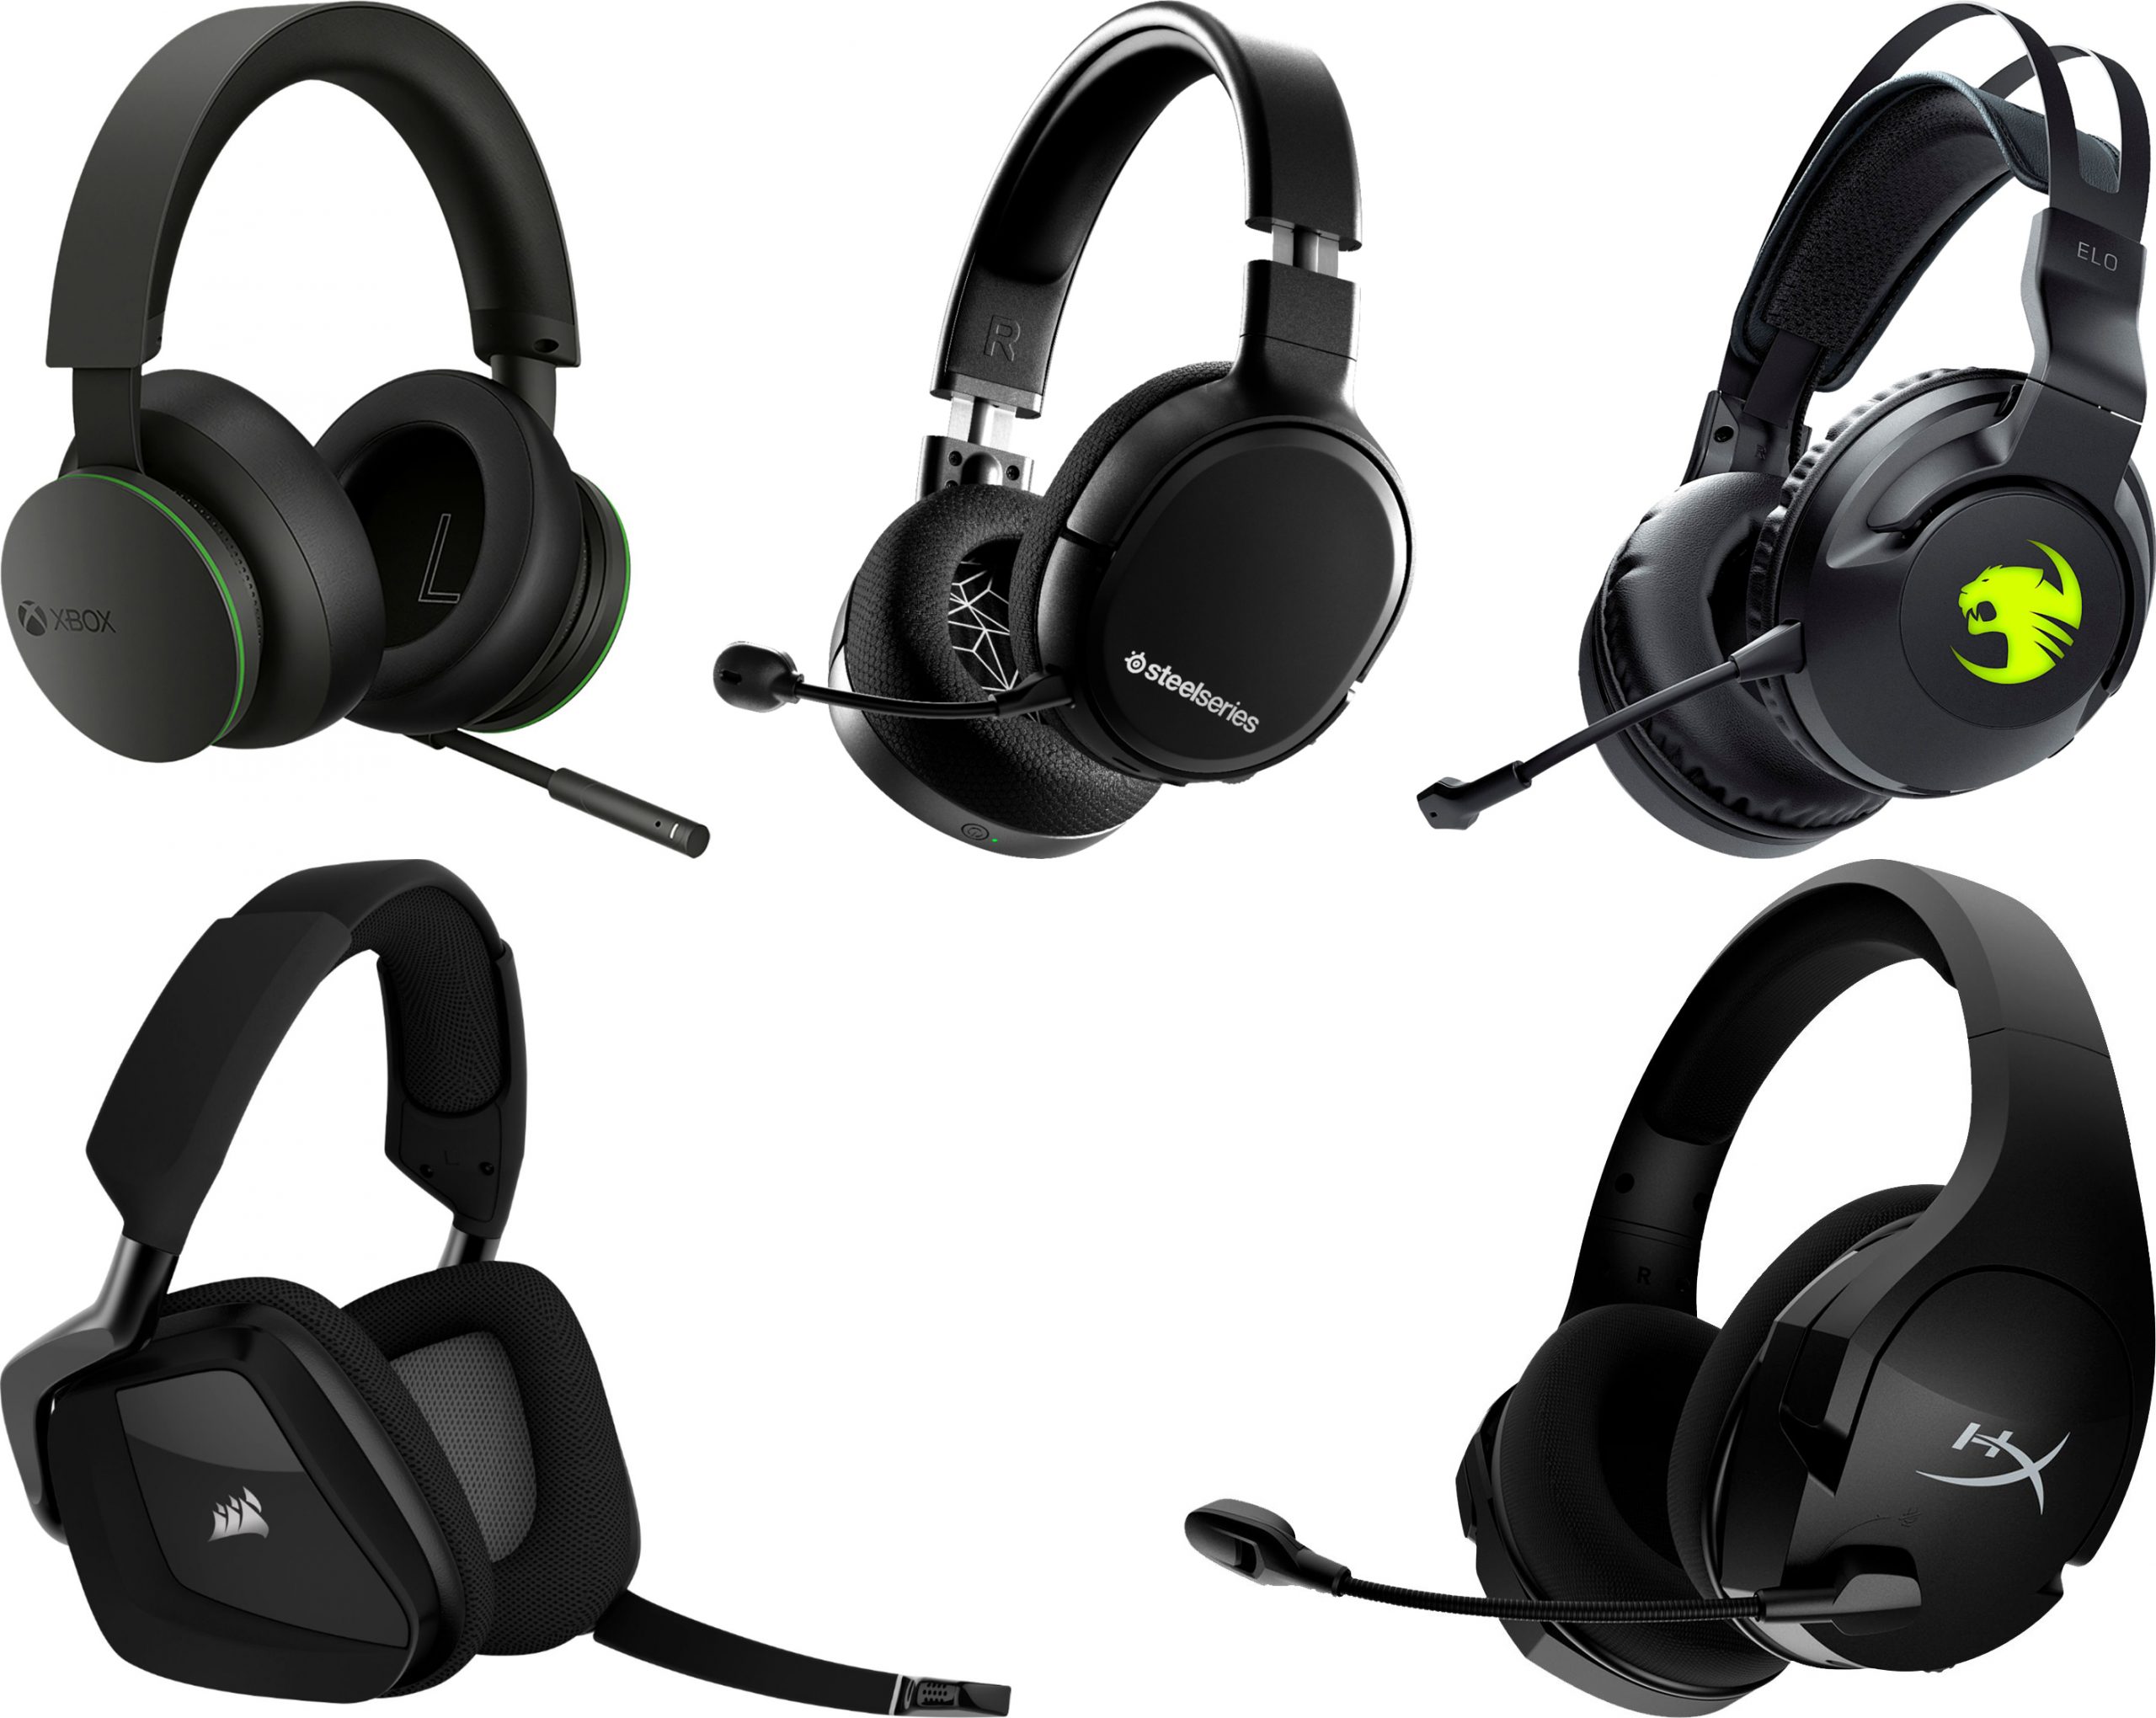 Top 5 wireless gaming headsets under $100 for PlayStation, Xbox and PC – 2021